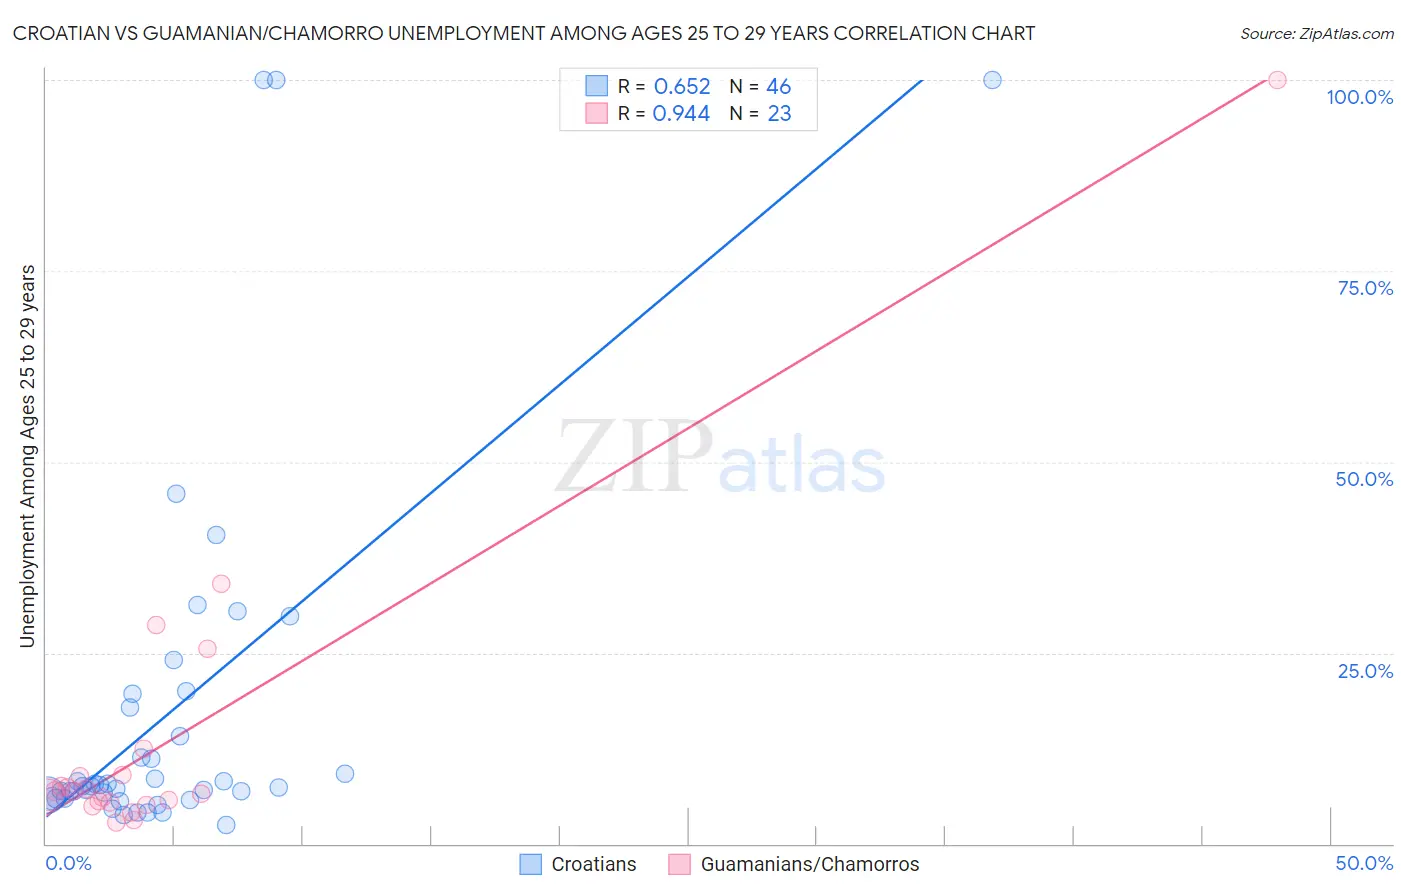 Croatian vs Guamanian/Chamorro Unemployment Among Ages 25 to 29 years